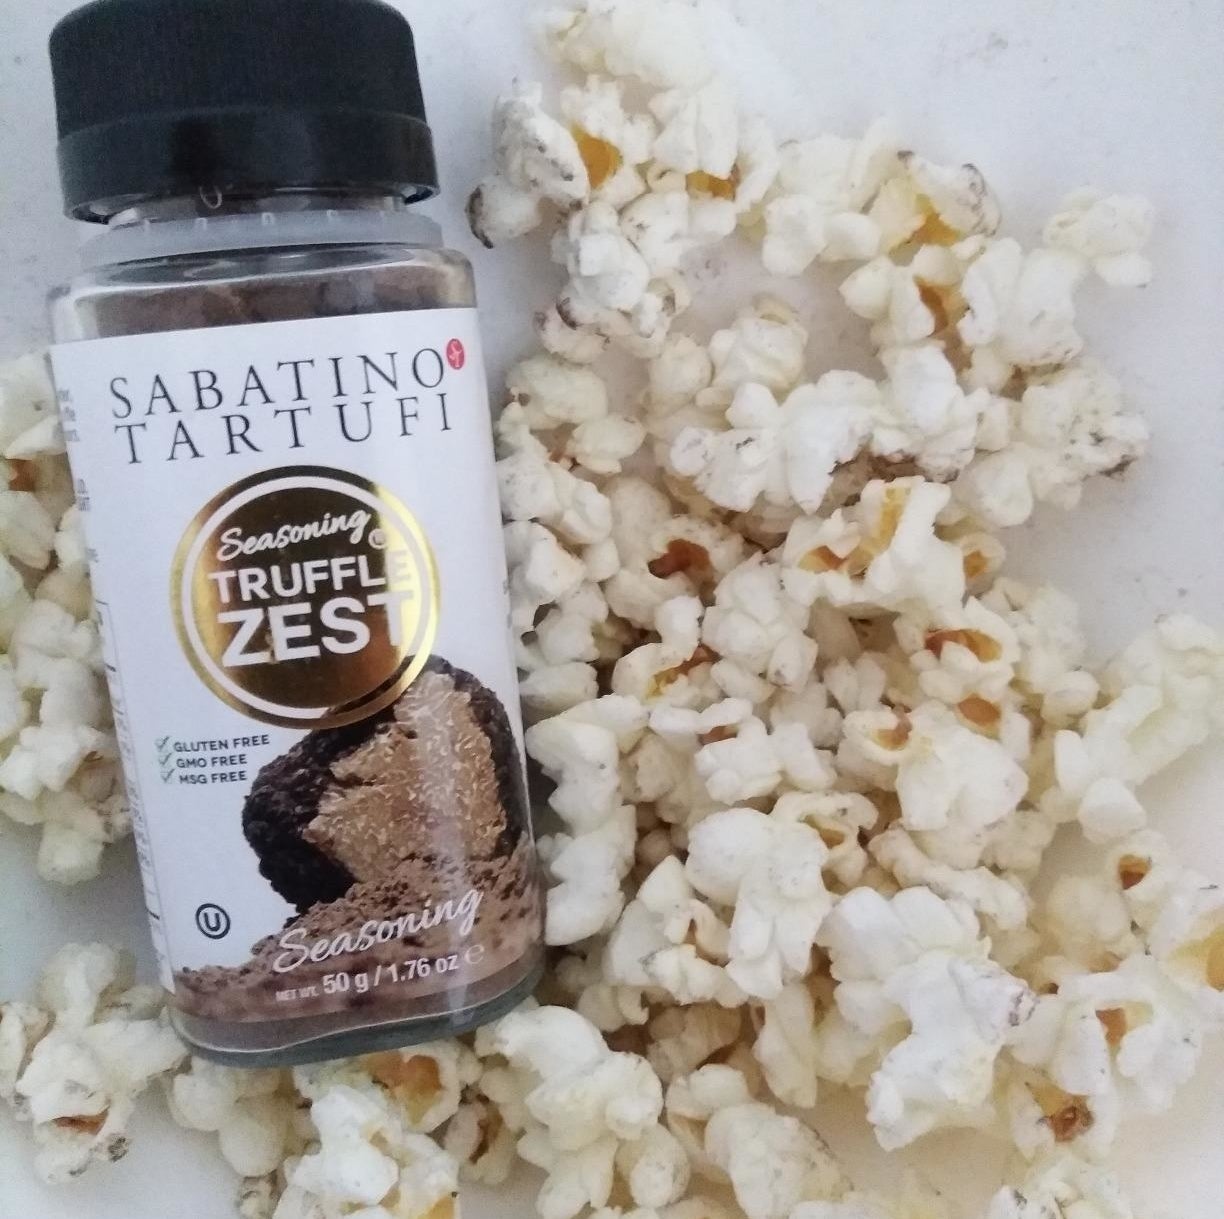 Reviewer image of bottle of seasoning and popcorn